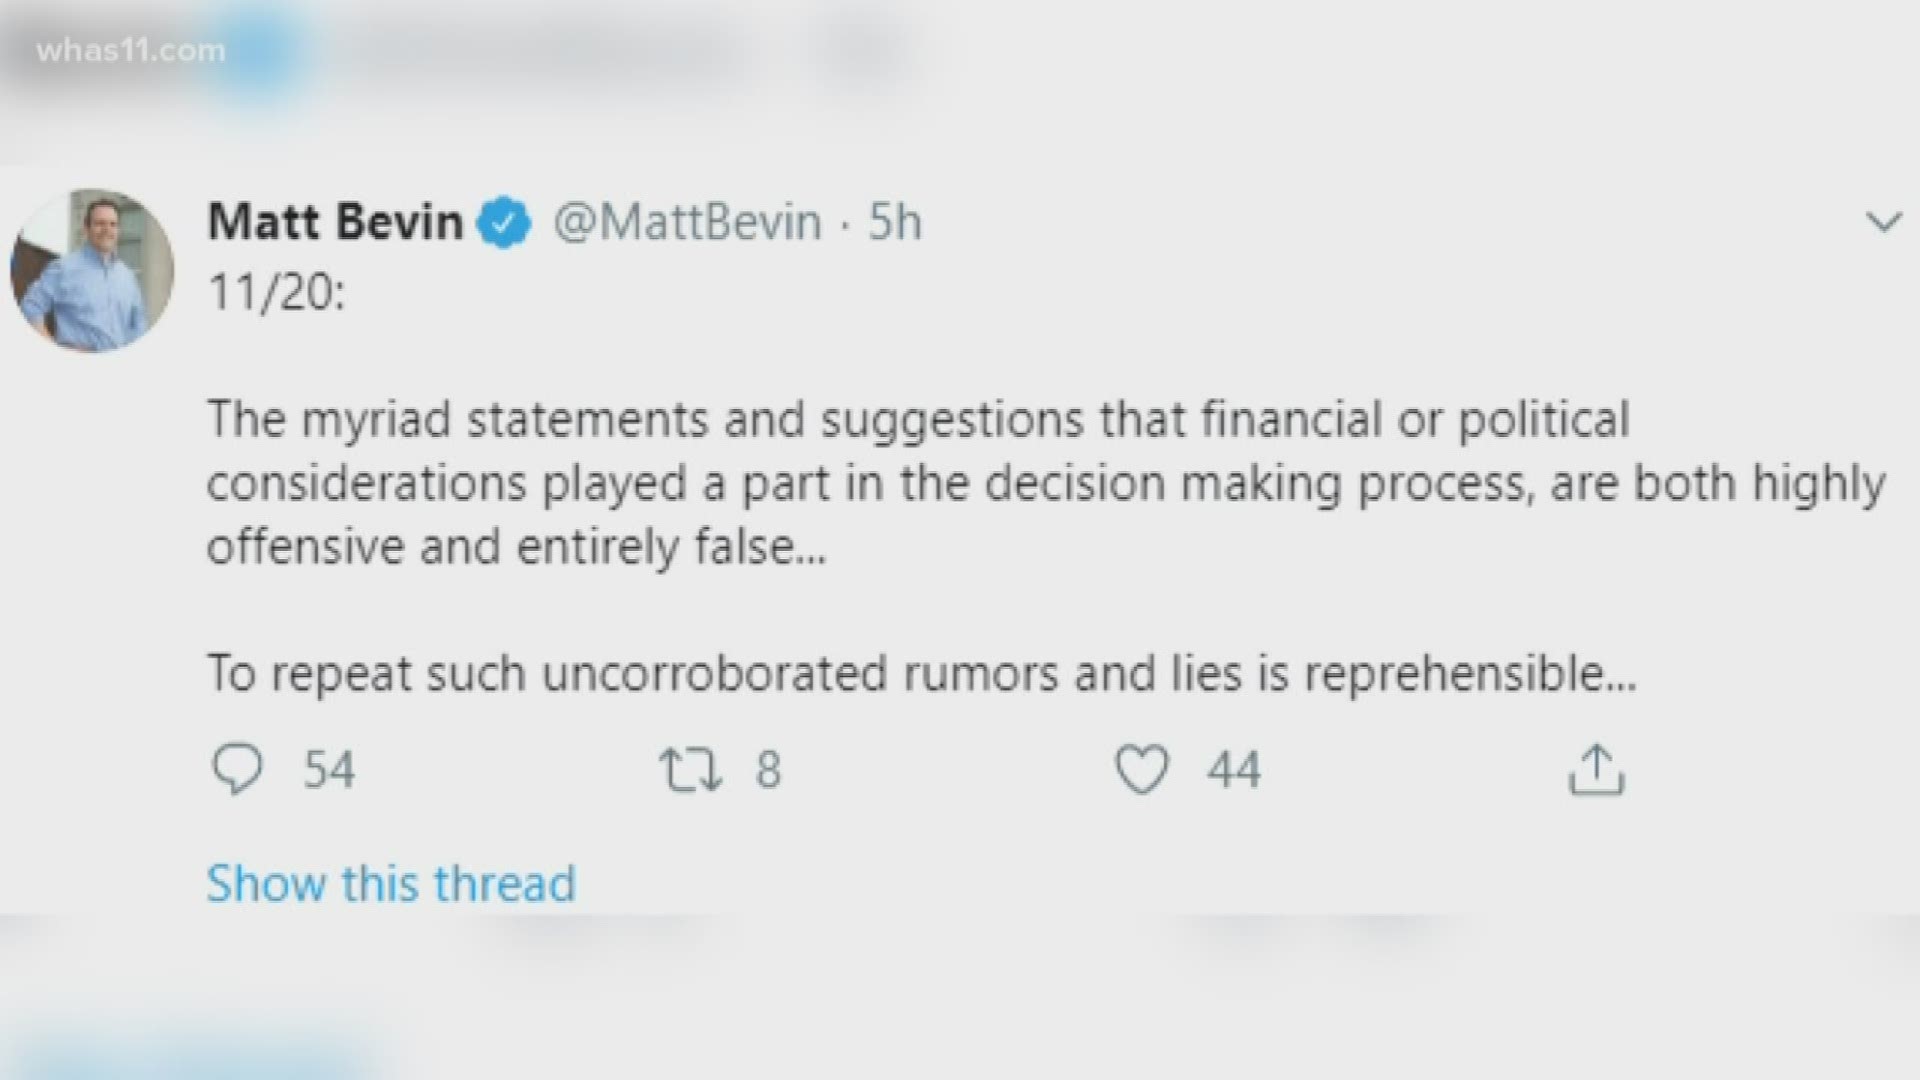 Some are calling for Bevin's pardons to be investigated.